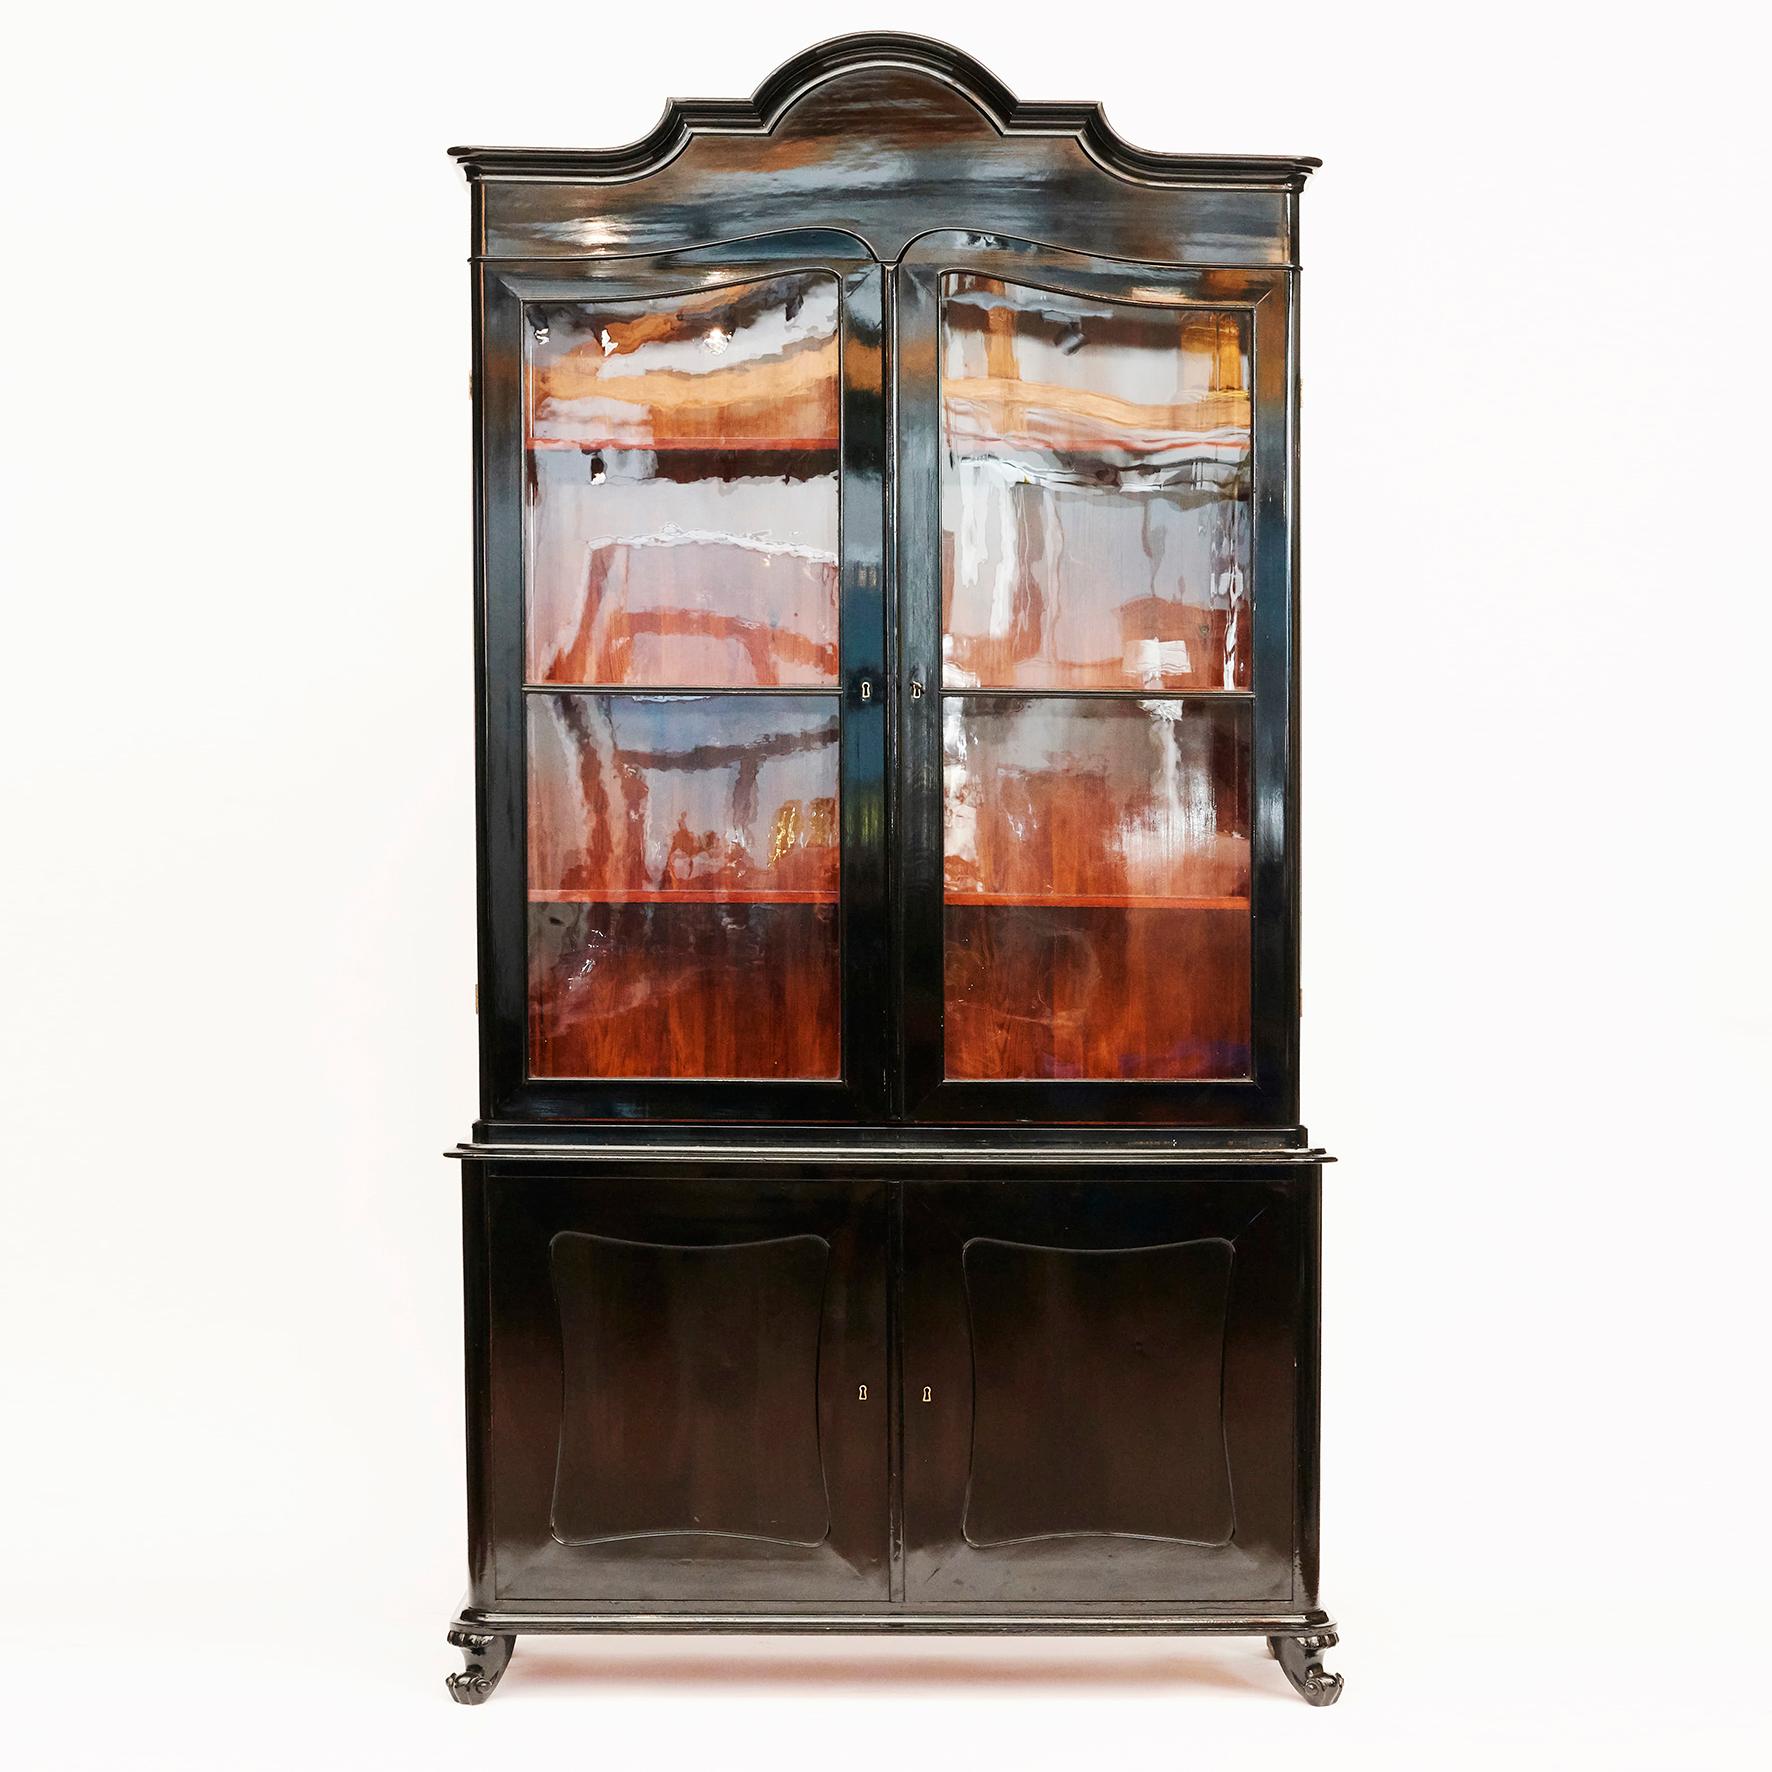 A beautiful late Empire 4-doors glass and wood cabinet / / bookcase in black polished mahogany.
Pair of locking paned glass doors sitting atop pair of locking wood doors with fillings. 

Late Empire / Chr. VIII, Denmark circa 1840-1860.

This